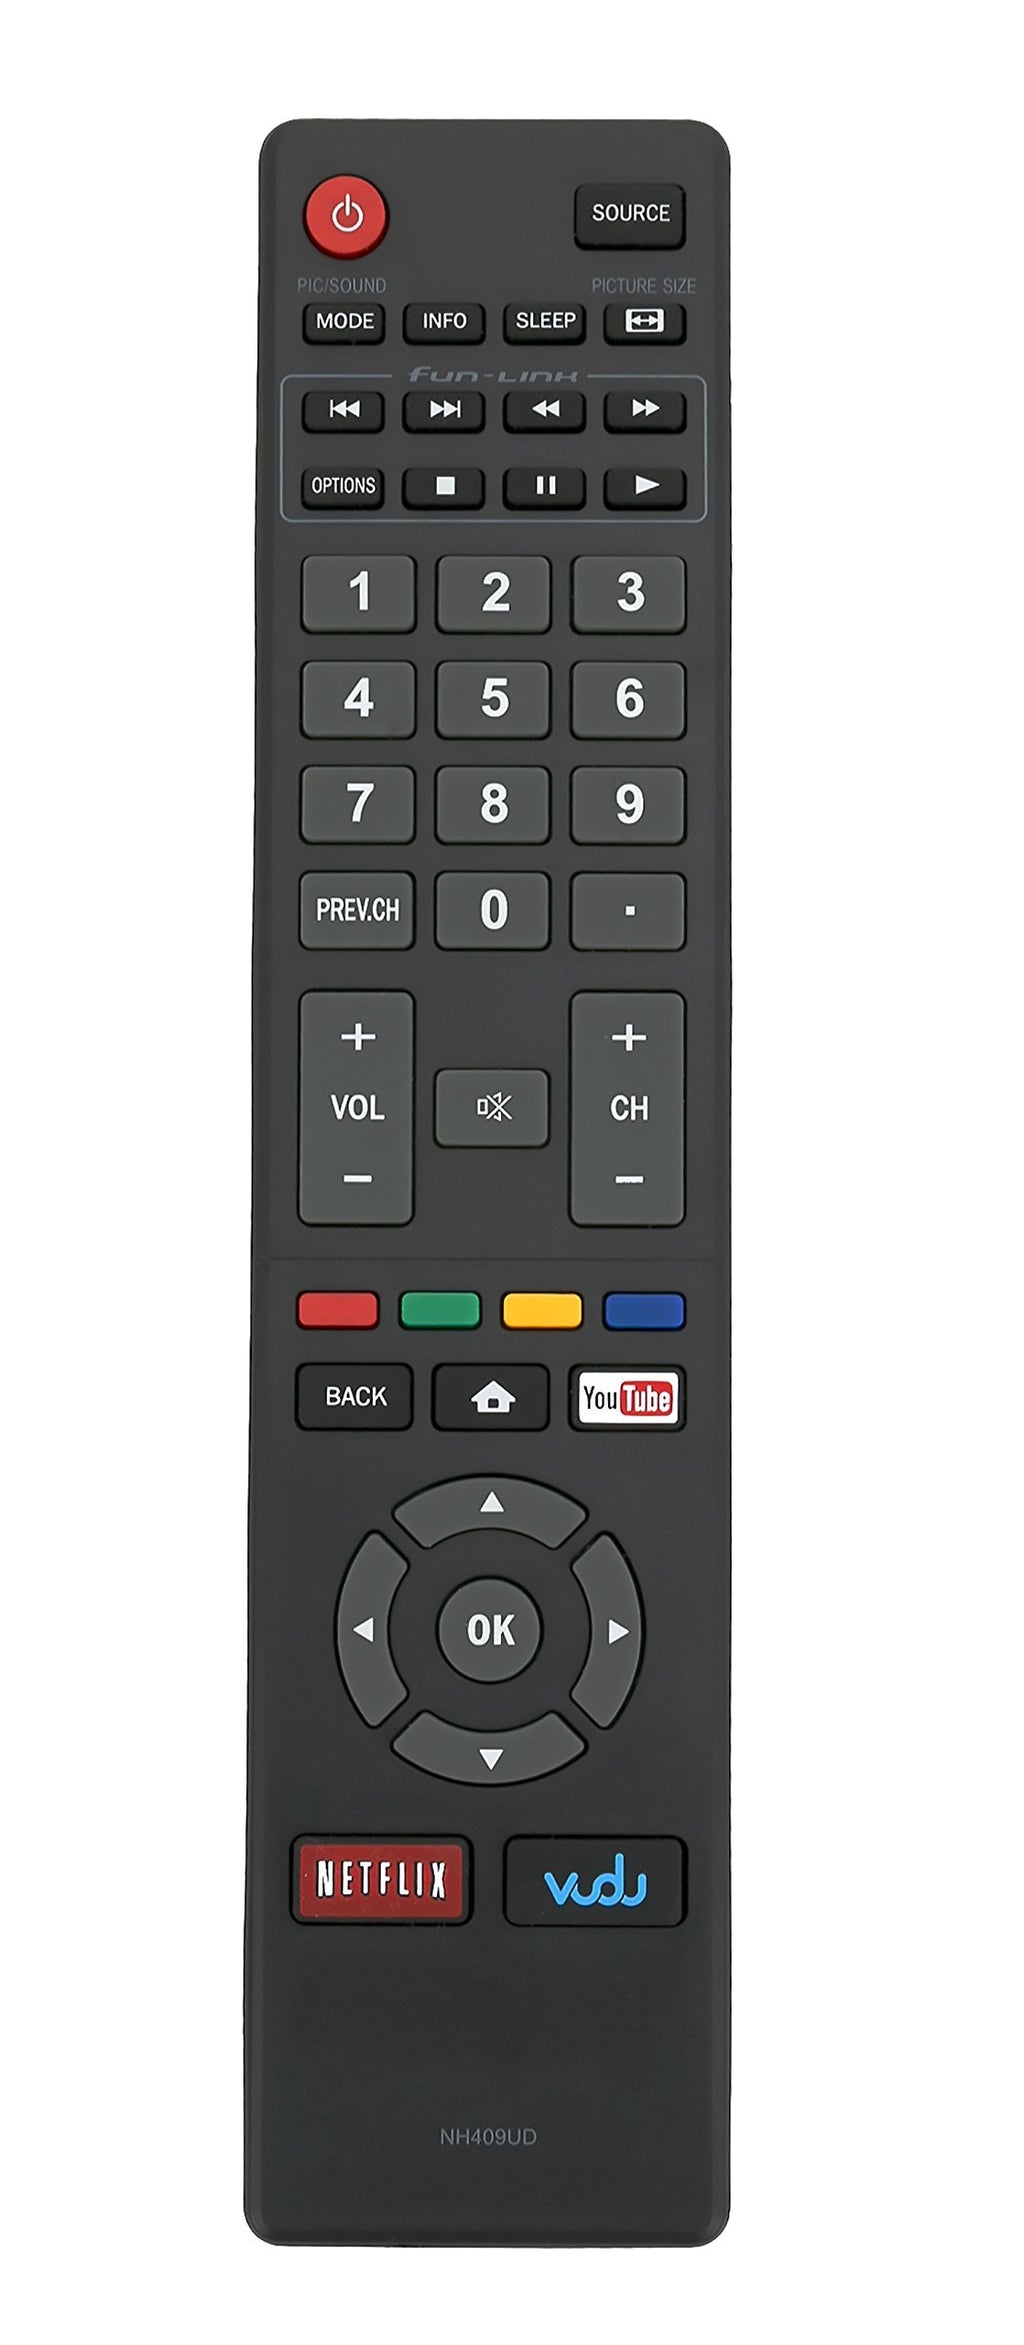 New NH409UD Remote Control fit for Magnavox 32MV304 F7 40MV336X 32MV304X 40MV324X 43MV314X 50MV314X 55MV314X NH410UP 50MV314X/F7 32MV304X/F7 NH410UP